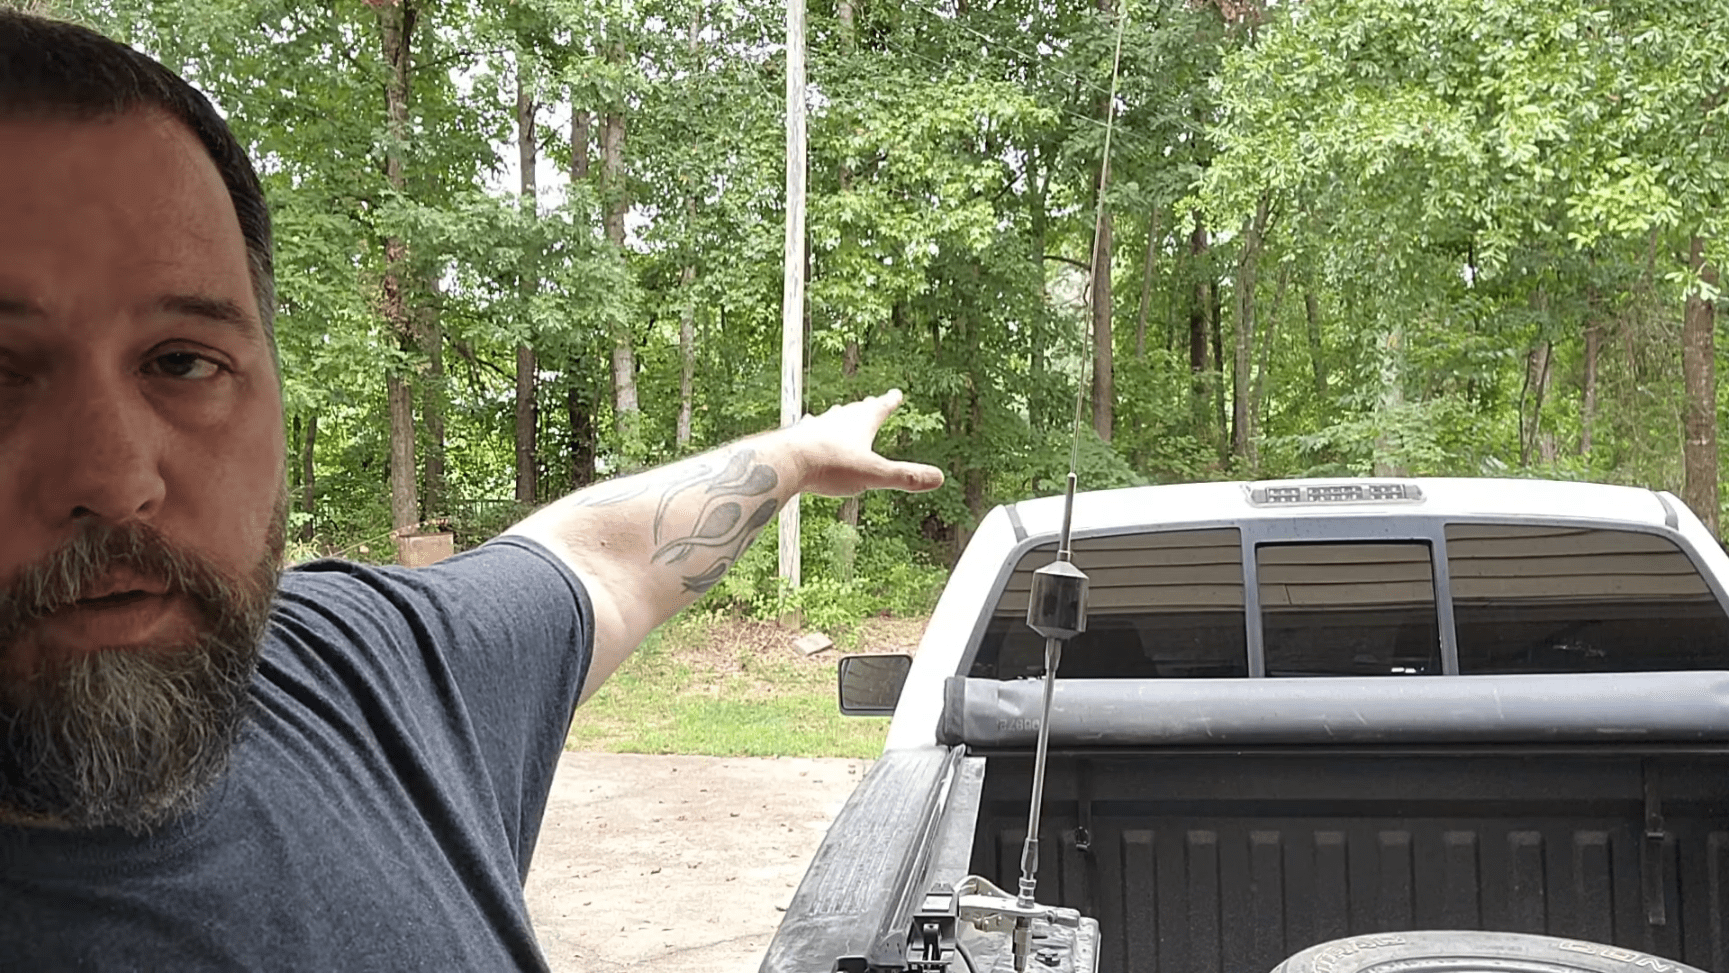 How To Mount A Cb Antenna In A Truck Bed?